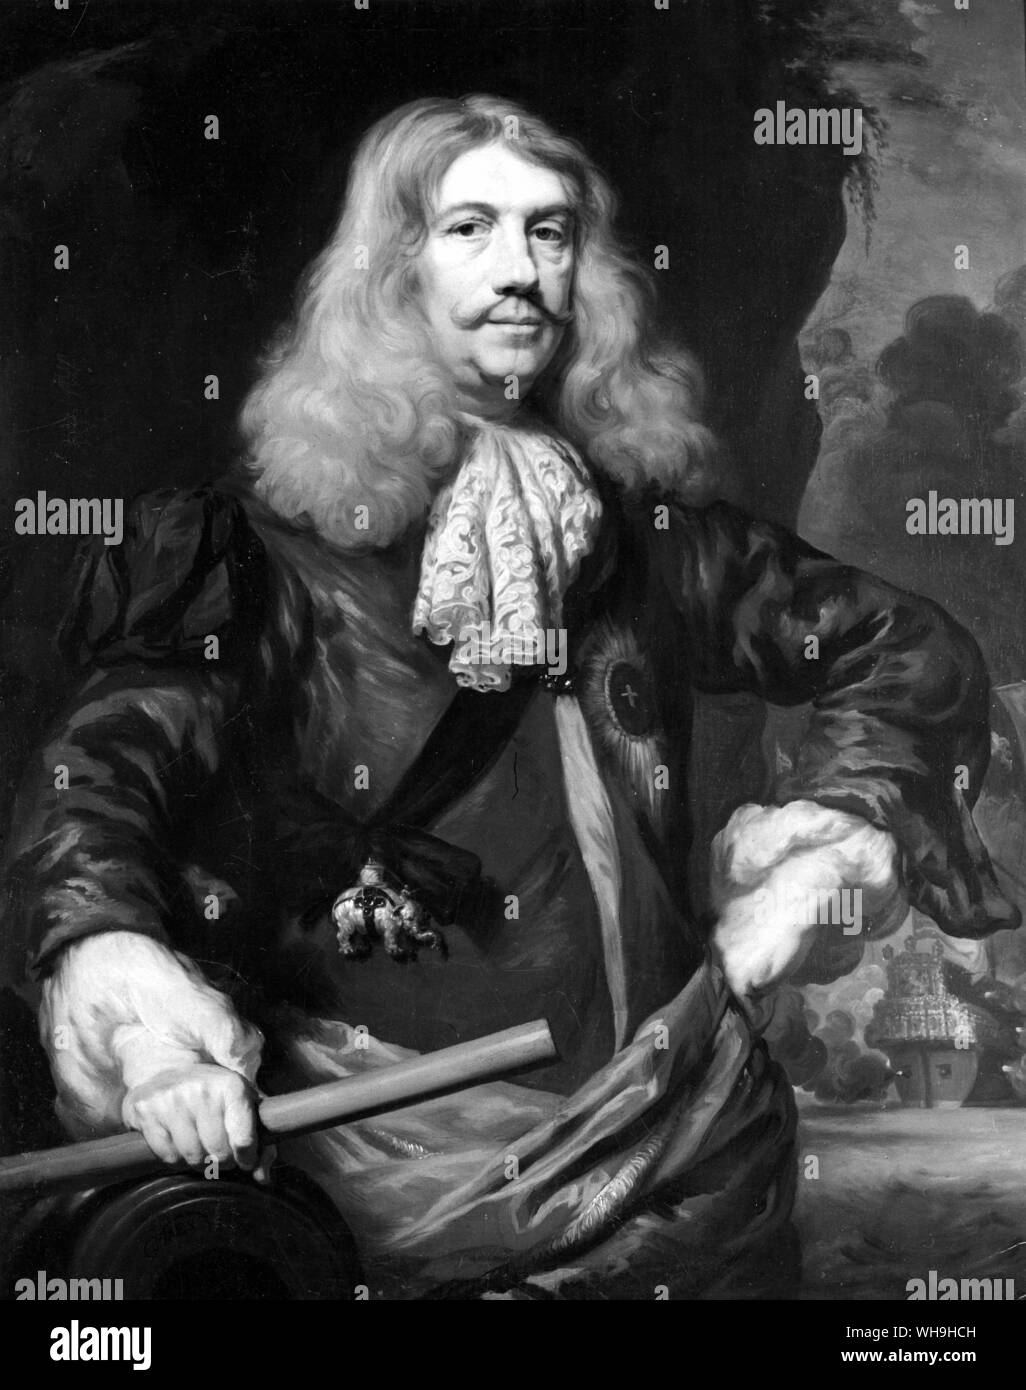 Dutch Admiral, Cornelius Tromp (1629-91), son of Dutch Admiral, Maarten Tromp. Cornelius led a battle against the English and French fleets in 1673. By Nicolas Maes Stock Photo